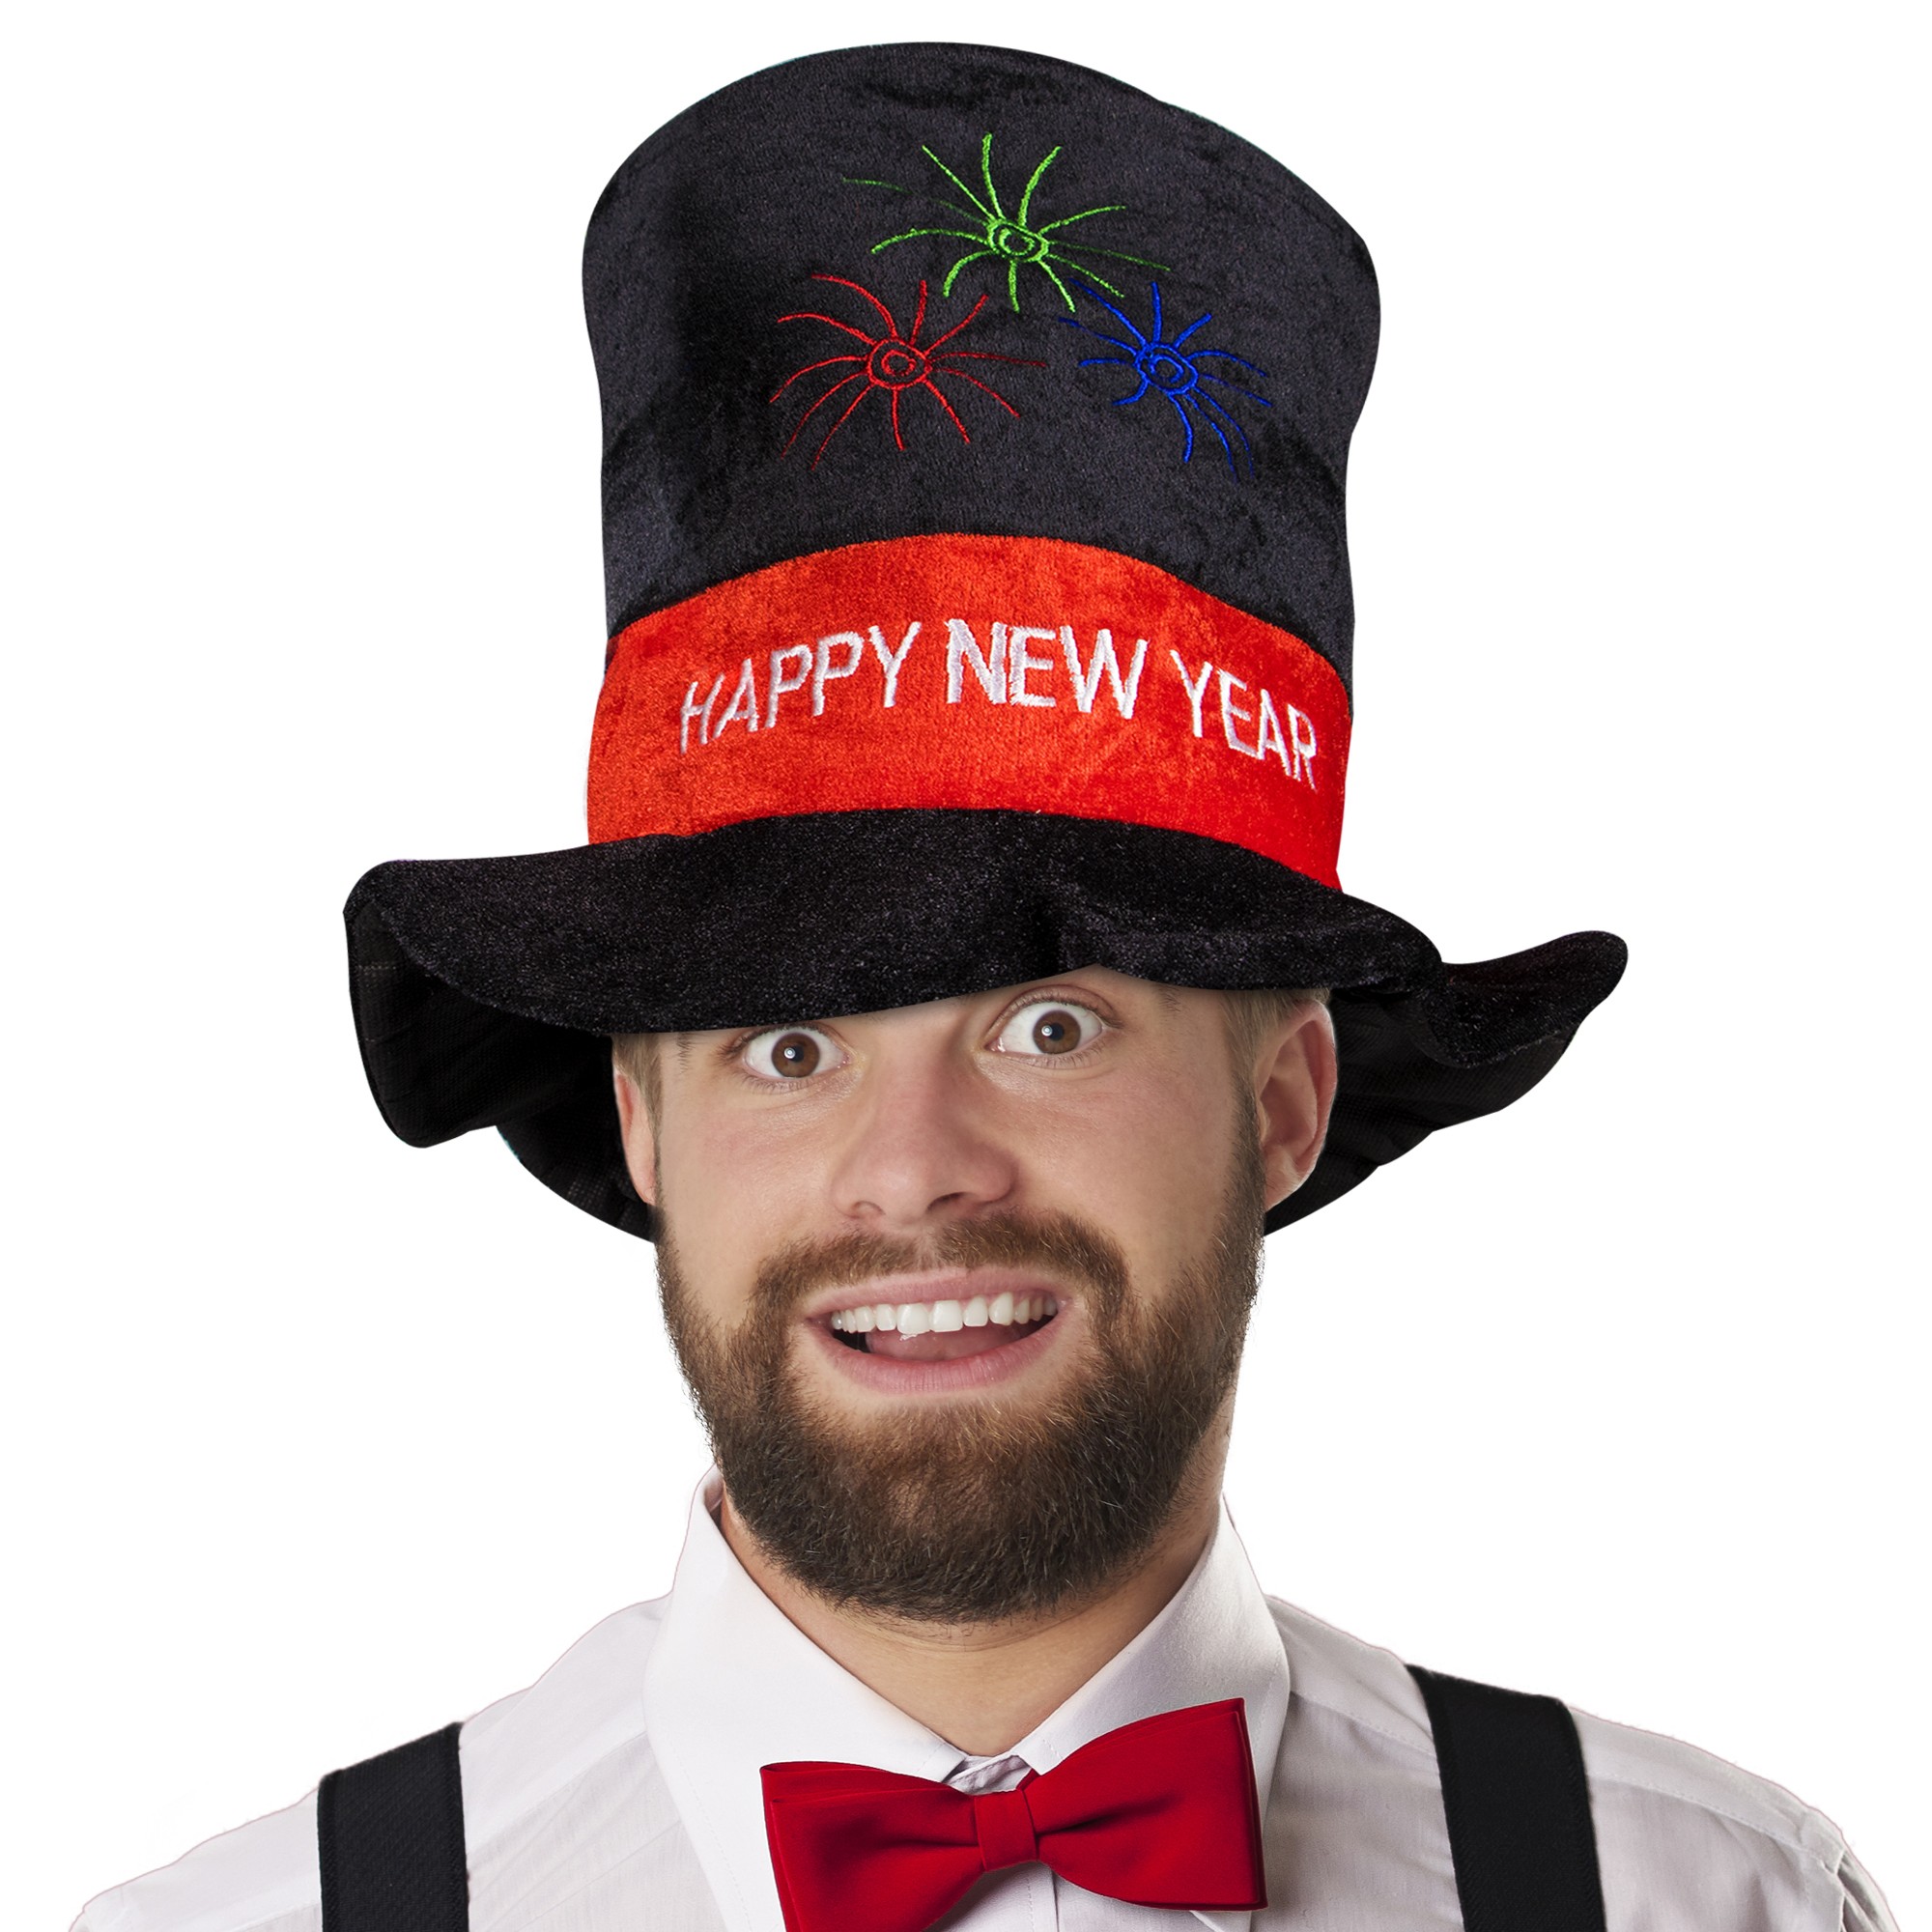 Details about   HAPPY NEW YEAR TOP HAT PLASTIC NO.210501 NEW & FREE SHIPPING!! 